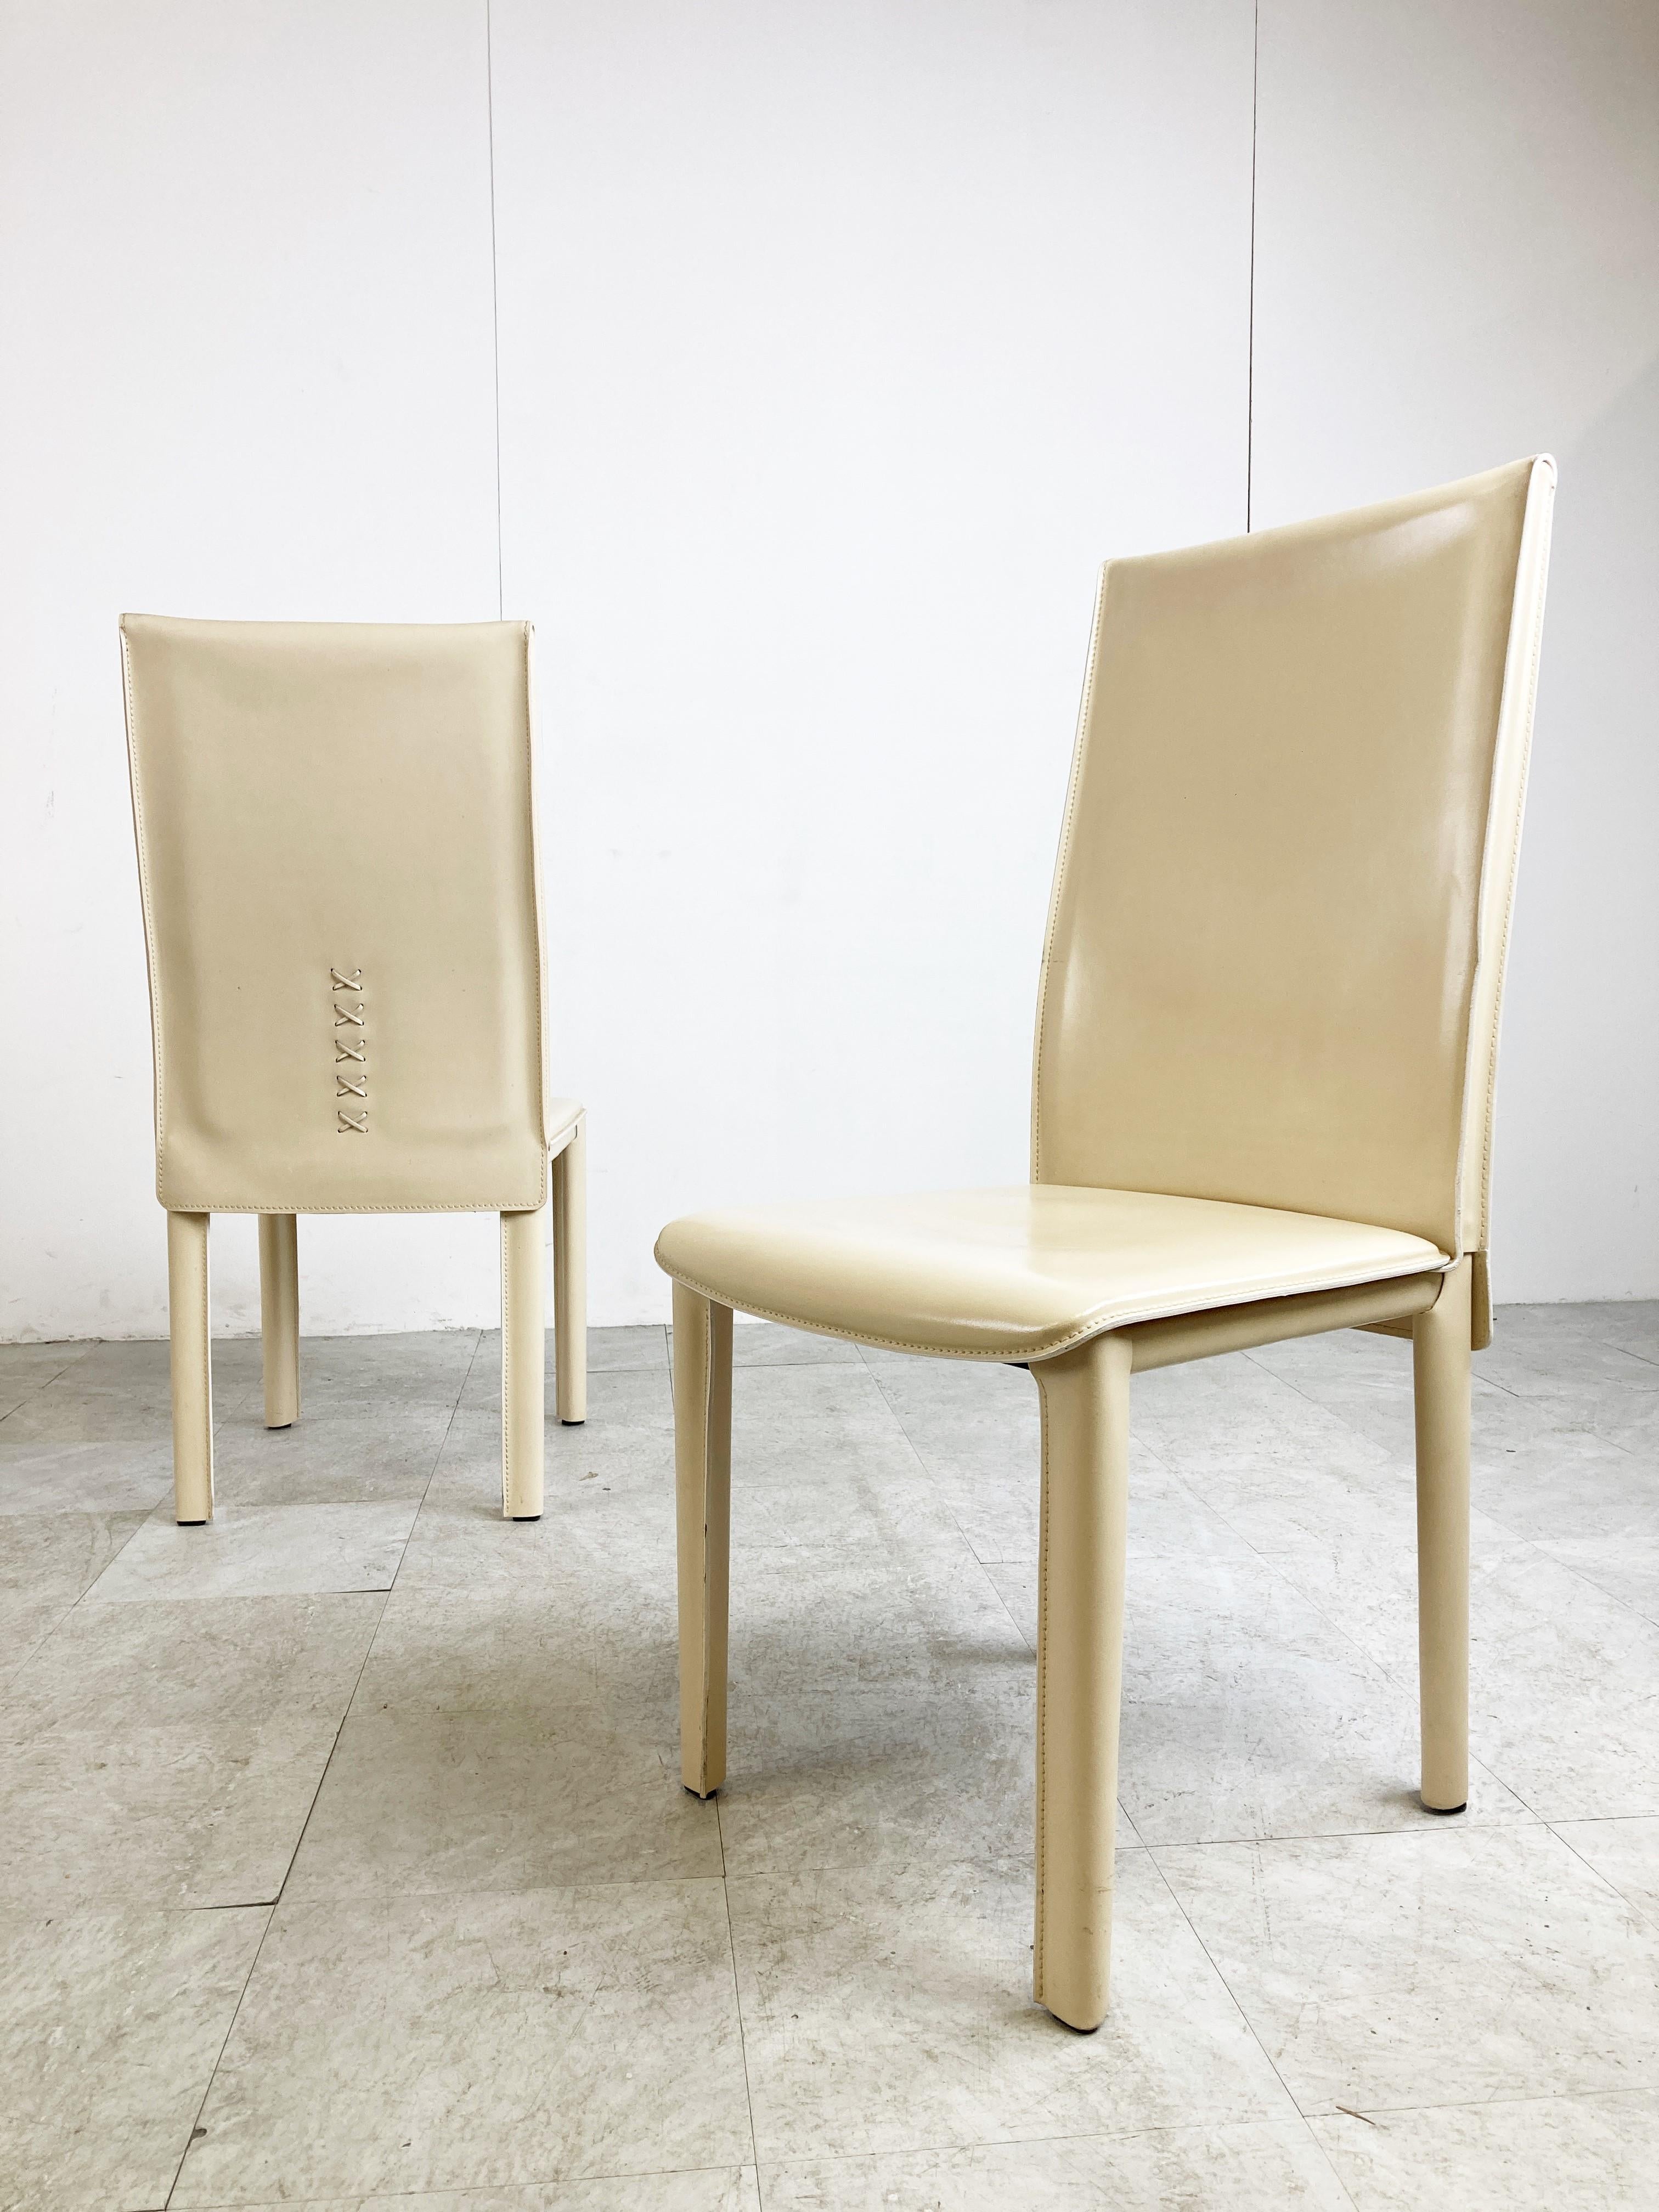 Vintage Dining Chairs by Arper Italy, 1980s For Sale 5